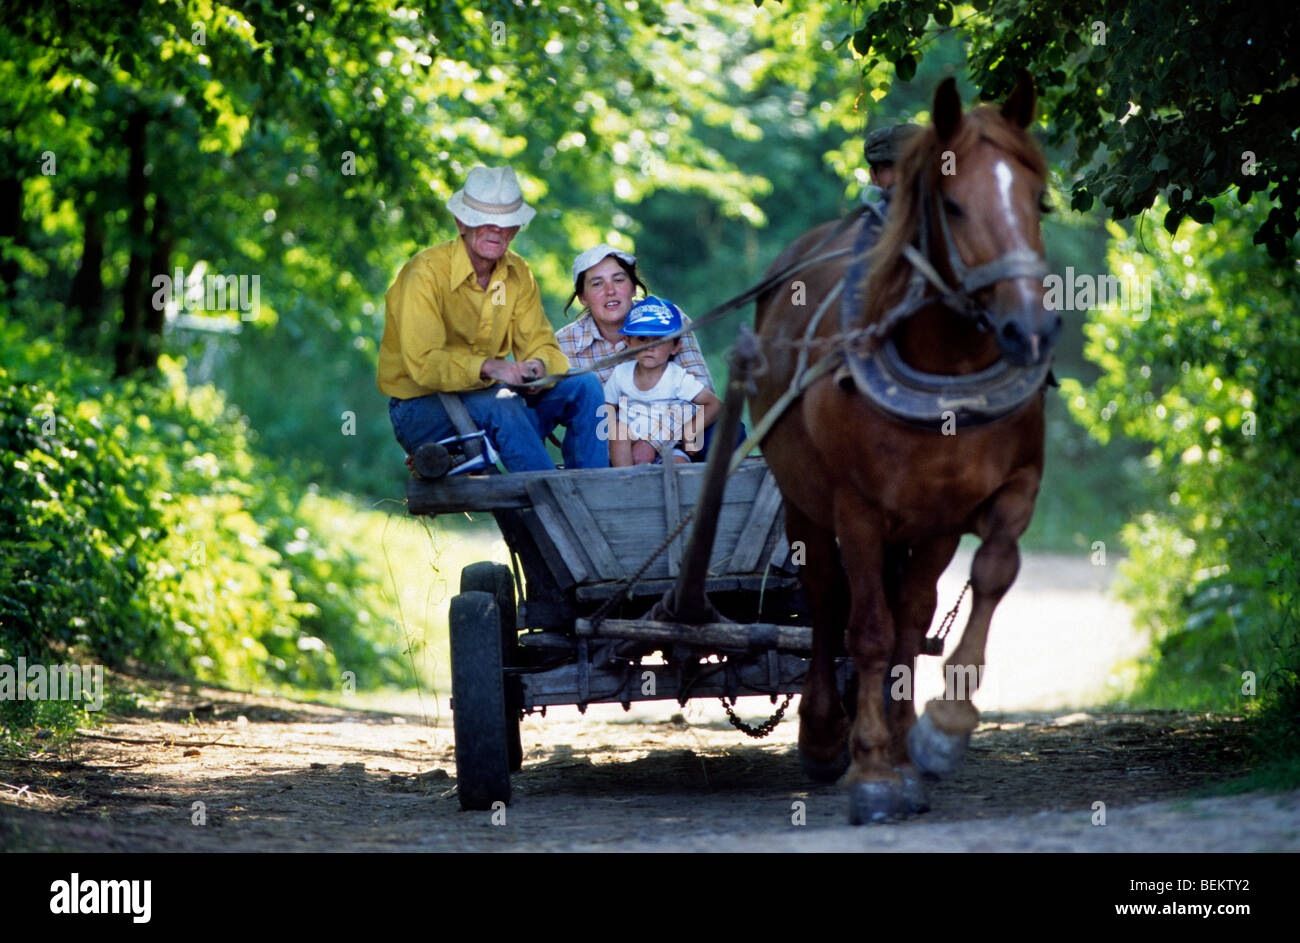 Transport of people with horse (Equus caballus) and cart in Poland Stock Photo